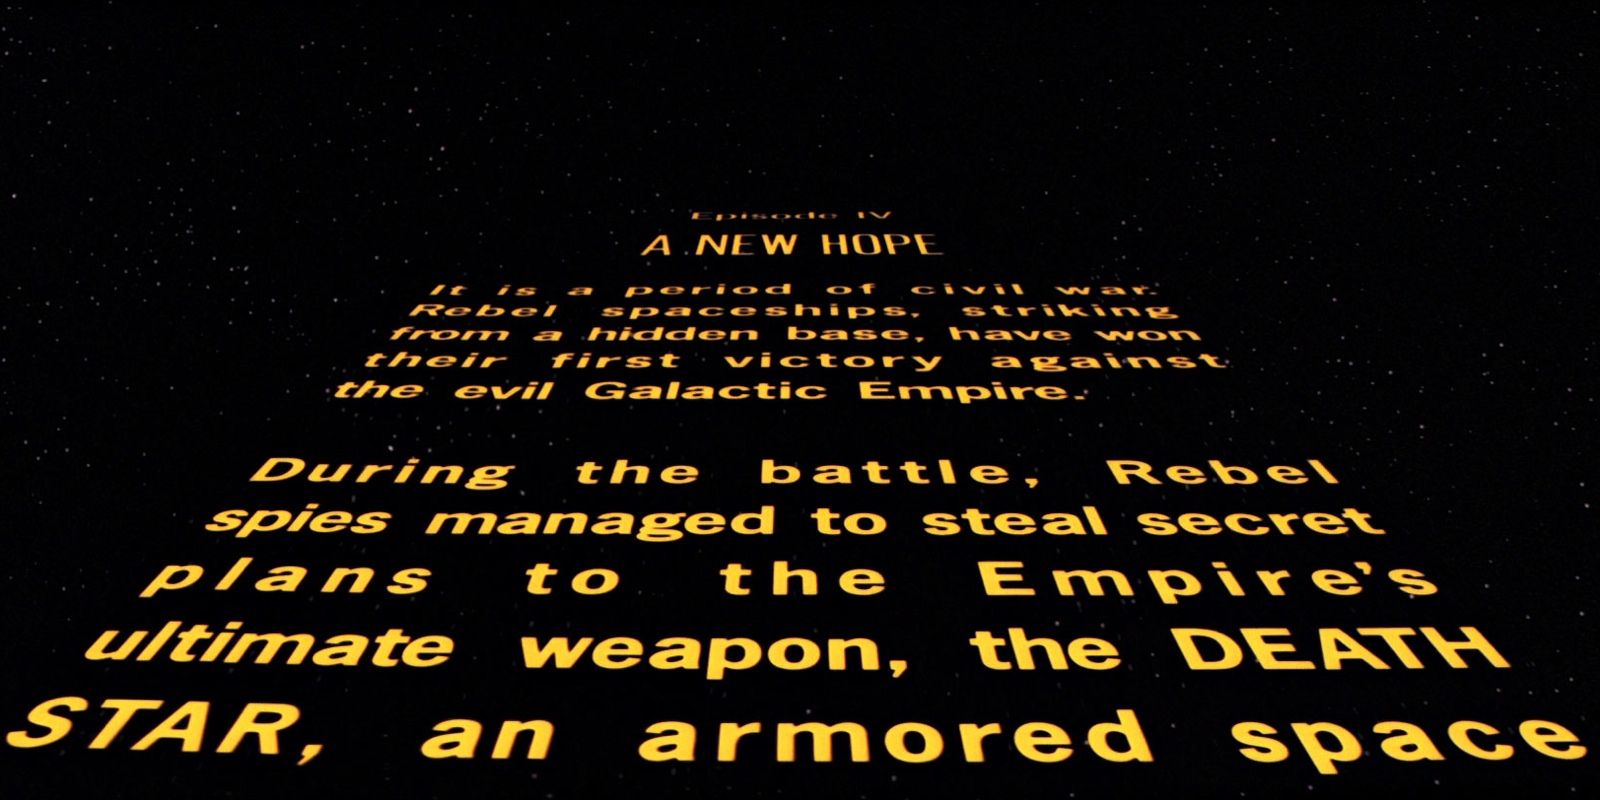 Star Wars A New Hope opening crawl.